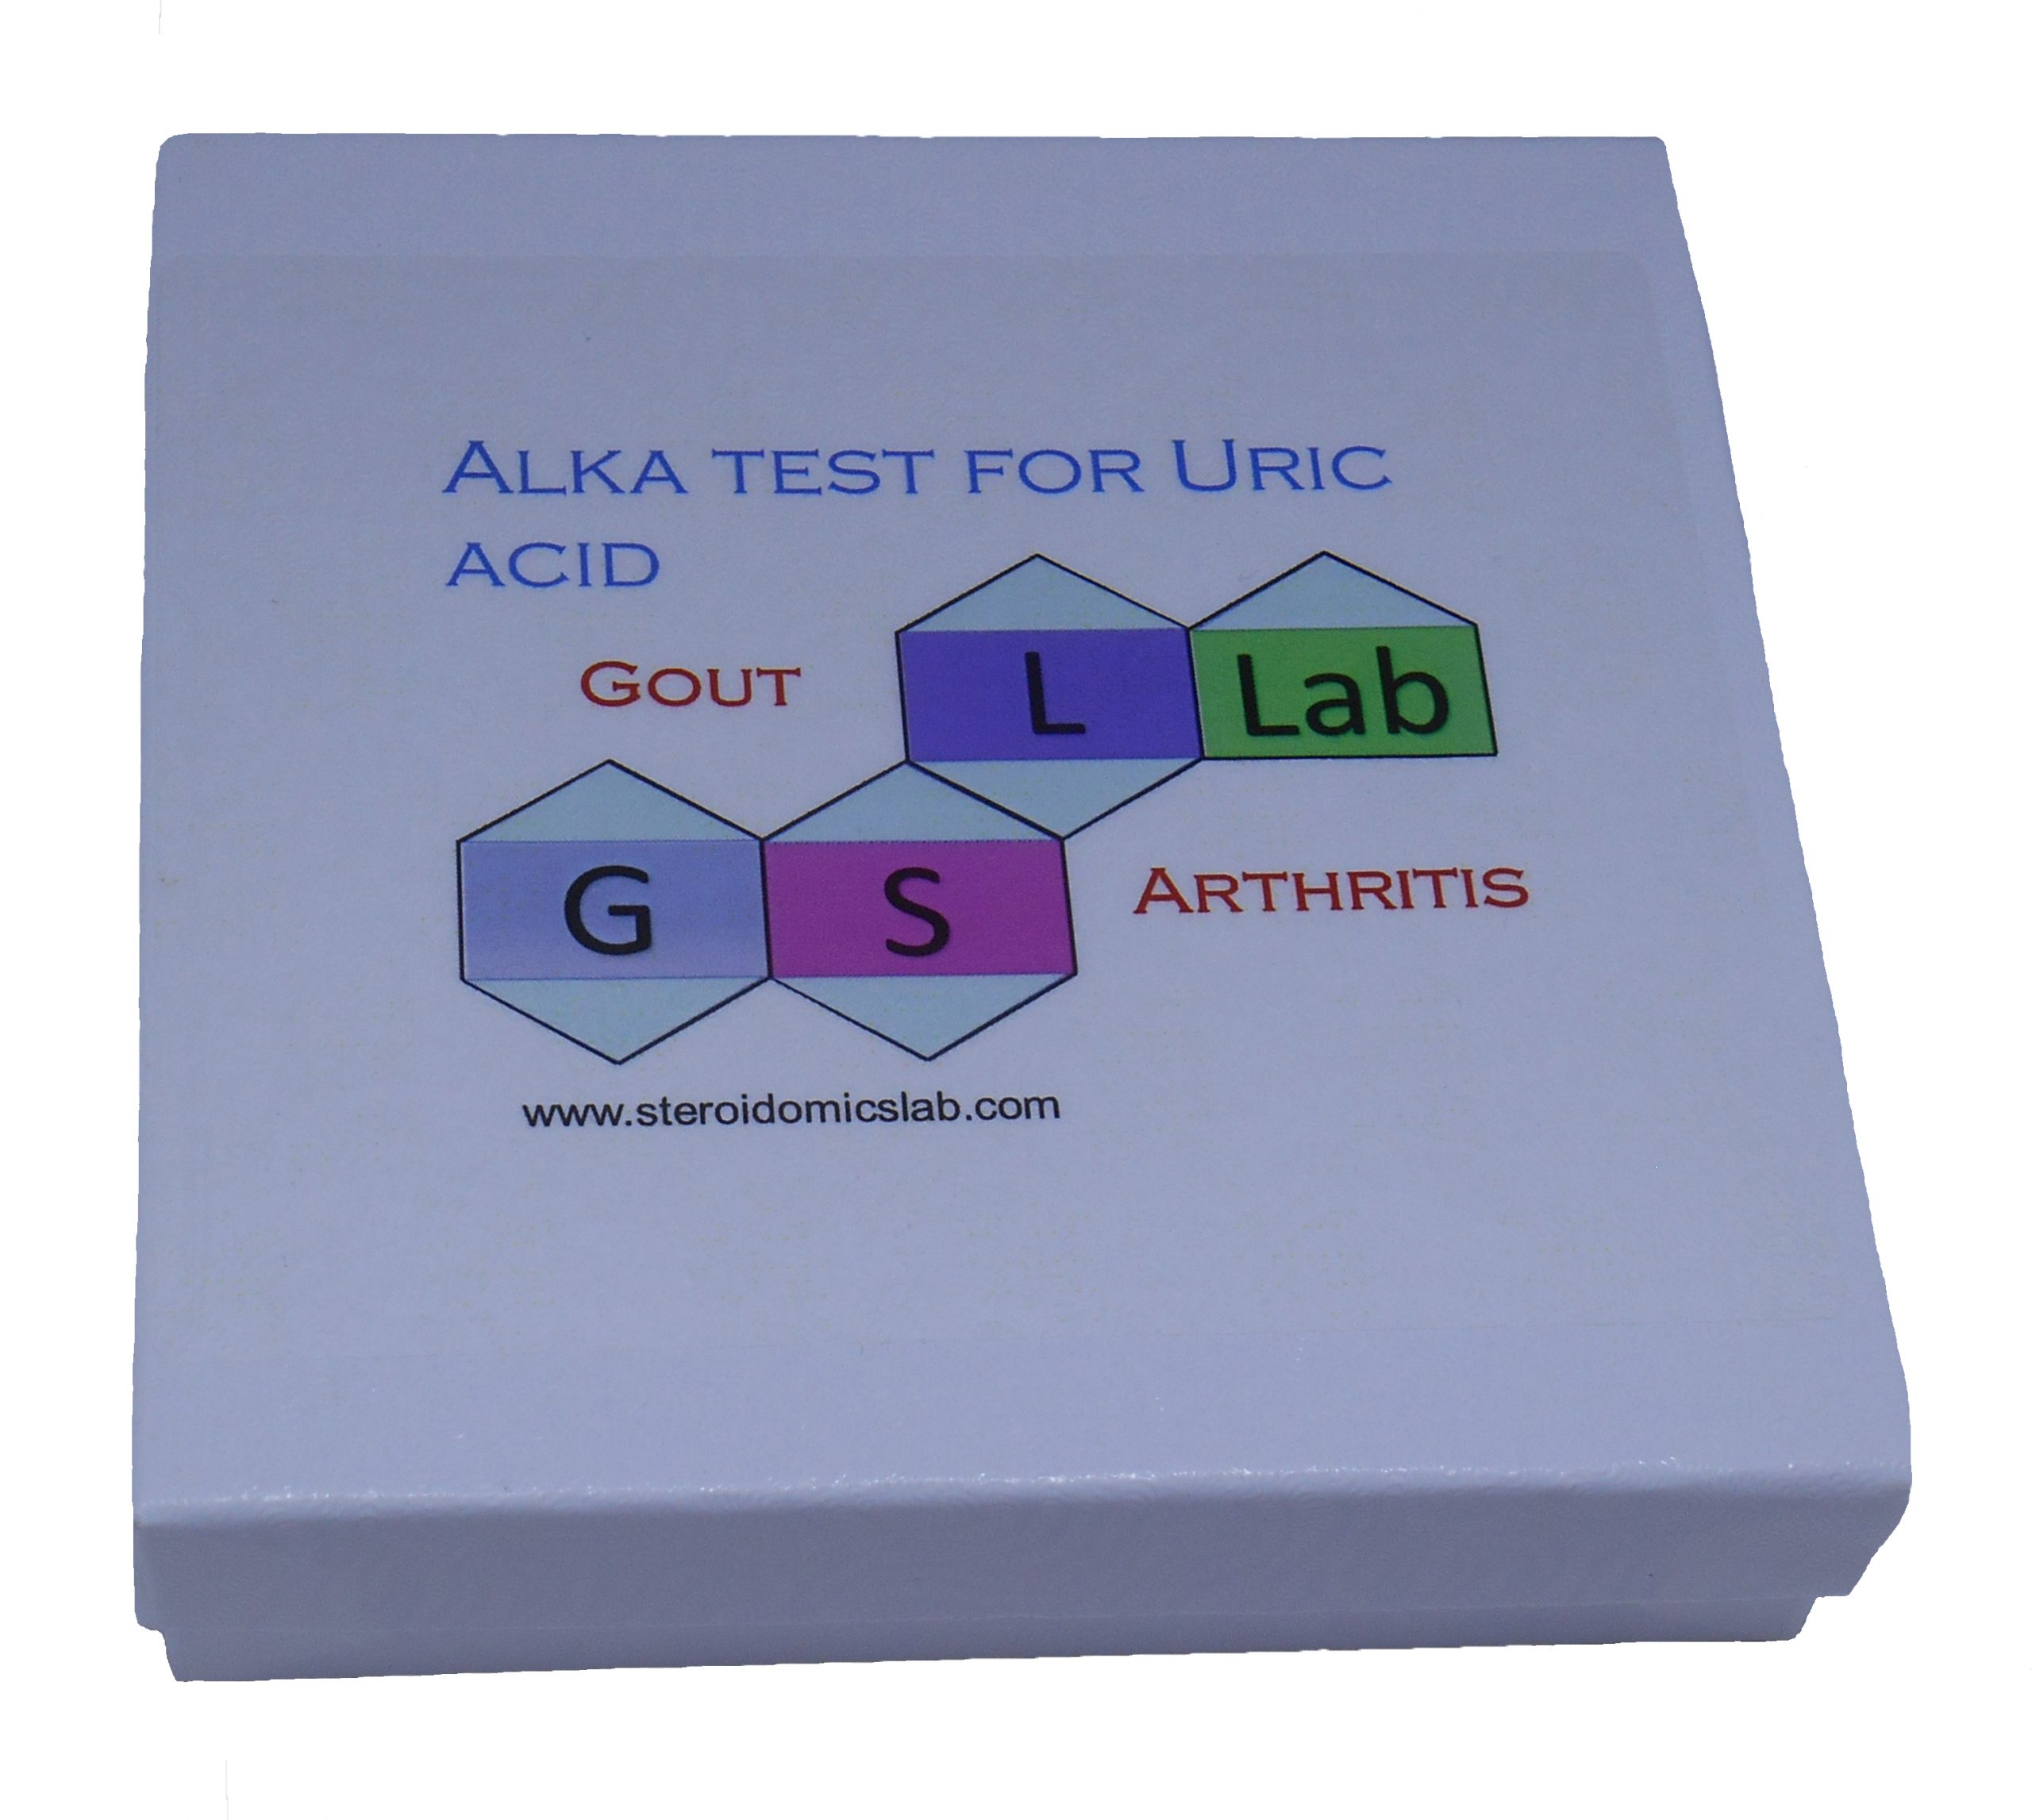 GSL ALKA Uric acid Home Test Kit for Gout and Arthritis - Steroid Lab